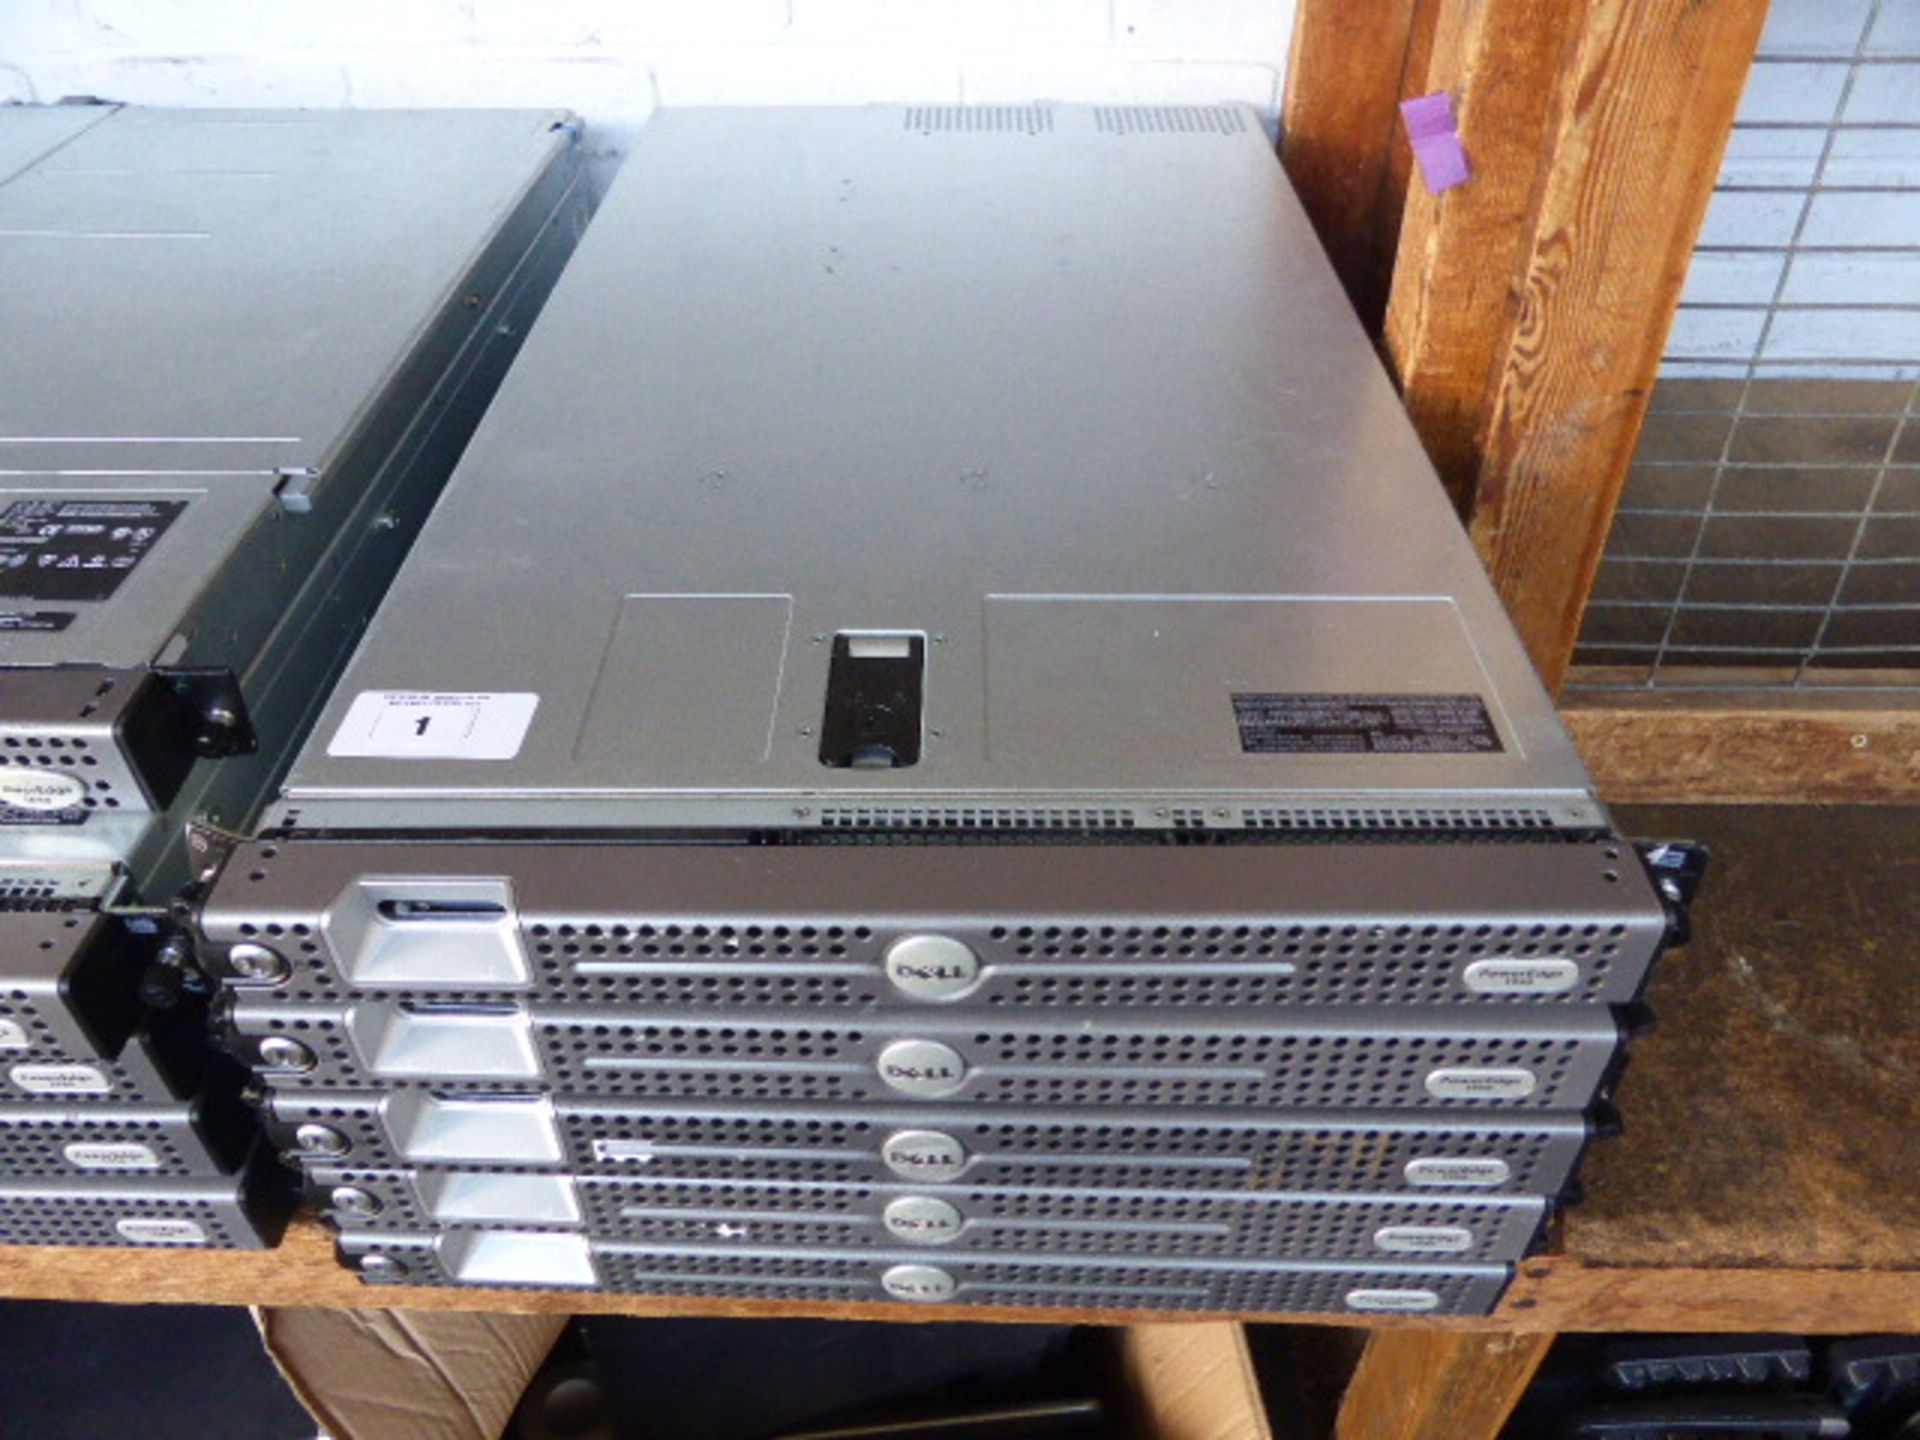 5 Dell PowerEdge 1950 rack mounted servers with no hard drives - Image 2 of 2